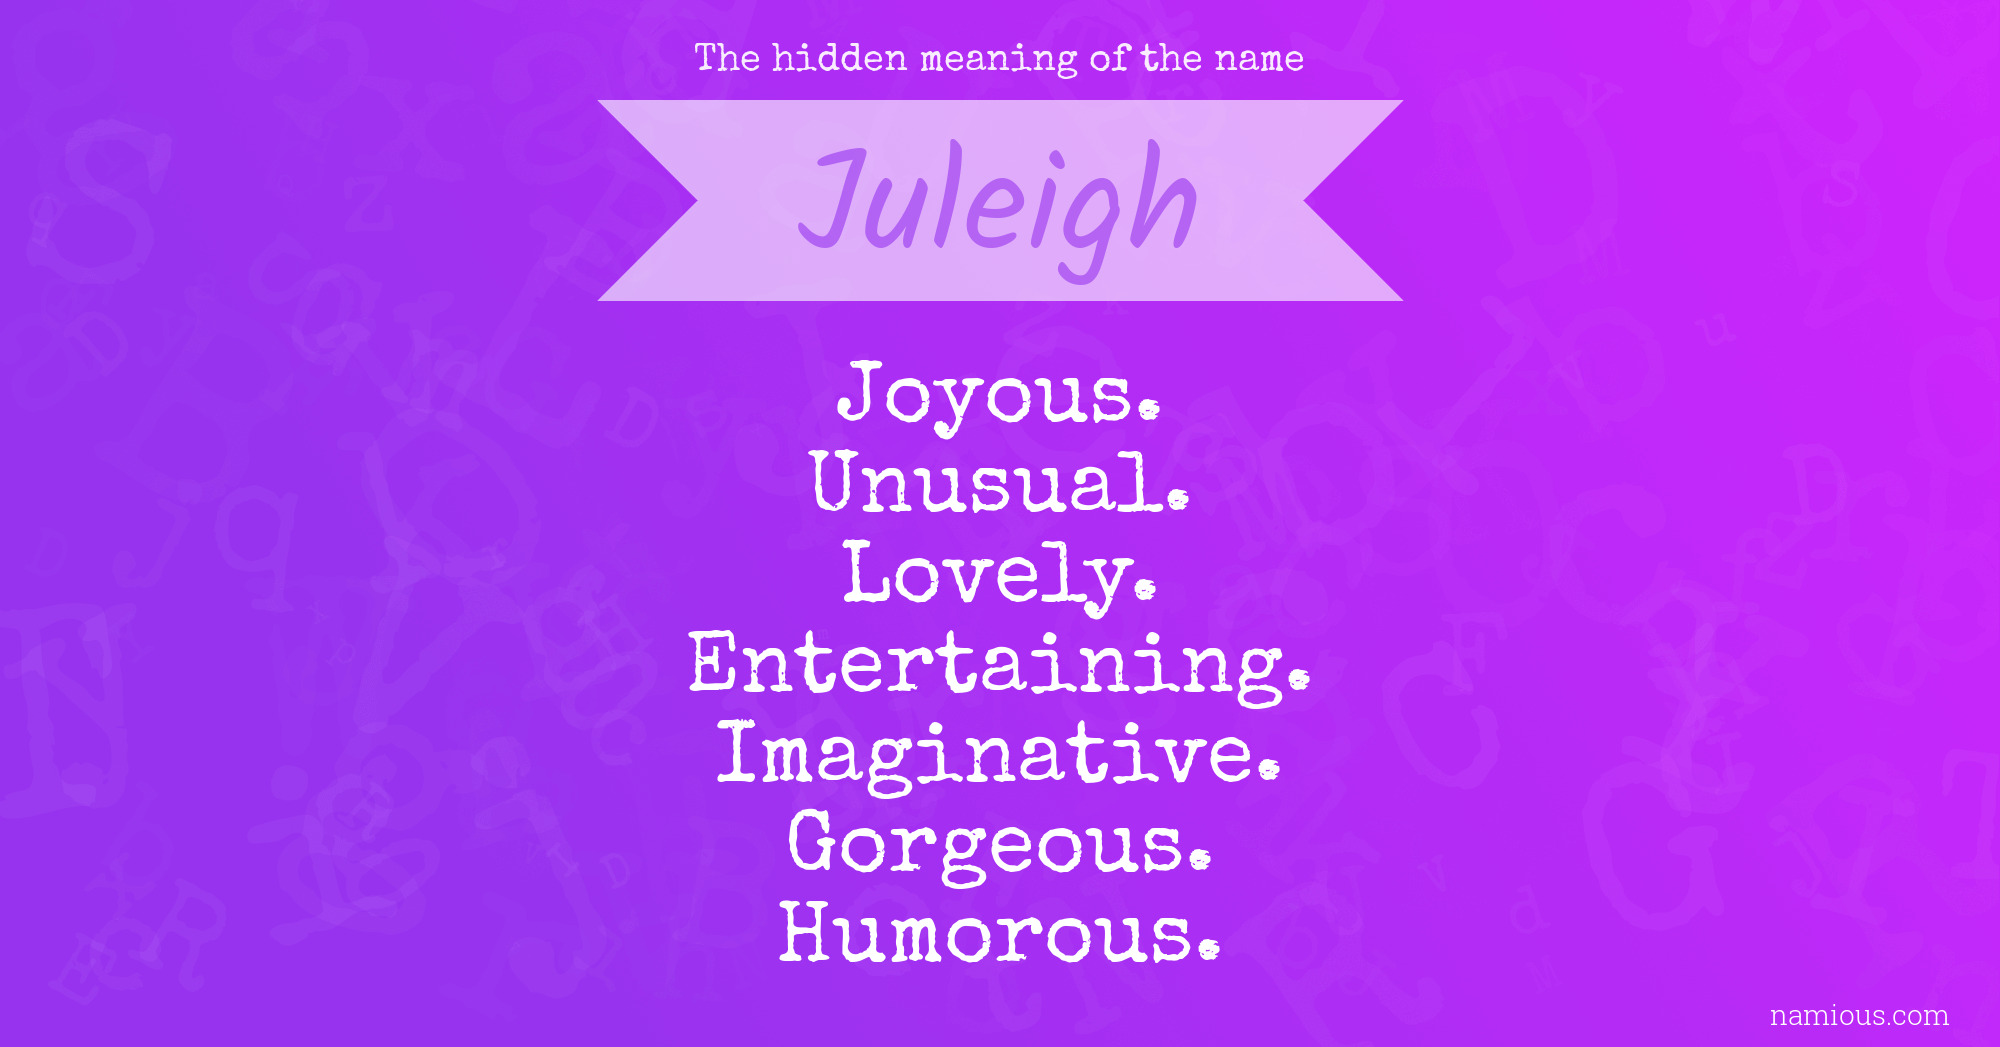 The hidden meaning of the name Juleigh